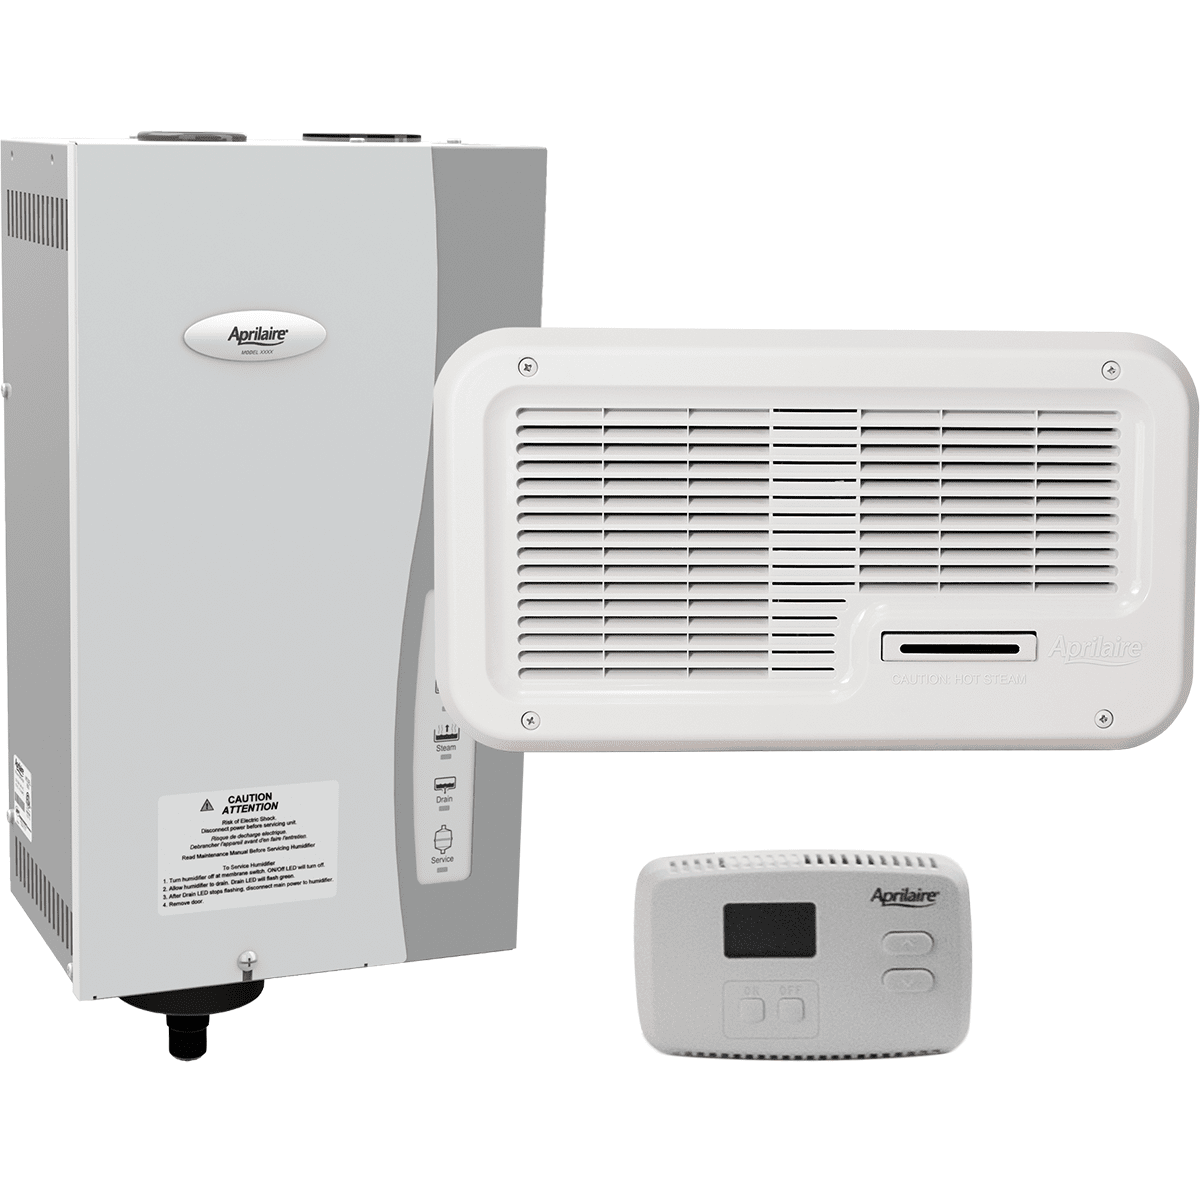 Aprilaire Modulating Steam Humidifier With Fan Pack (model 866)